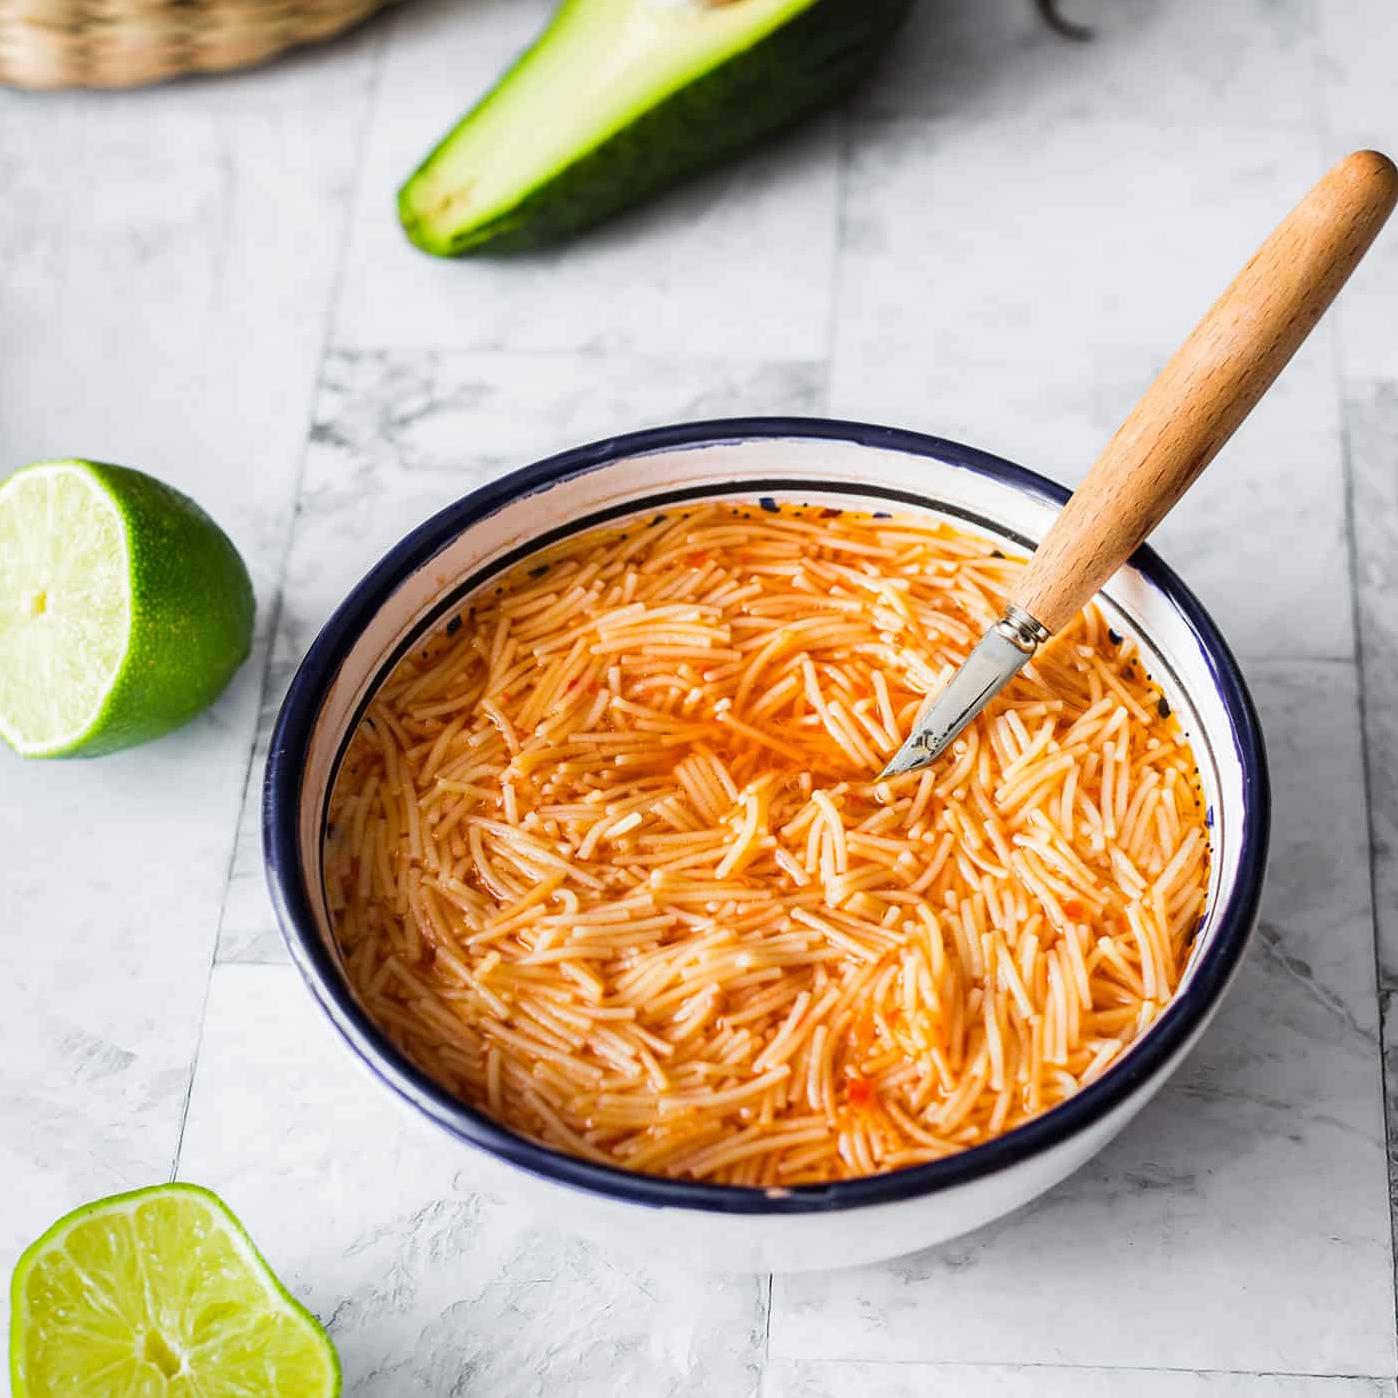  Satisfy your hunger cravings with a bowl of Sopa De Fideos.